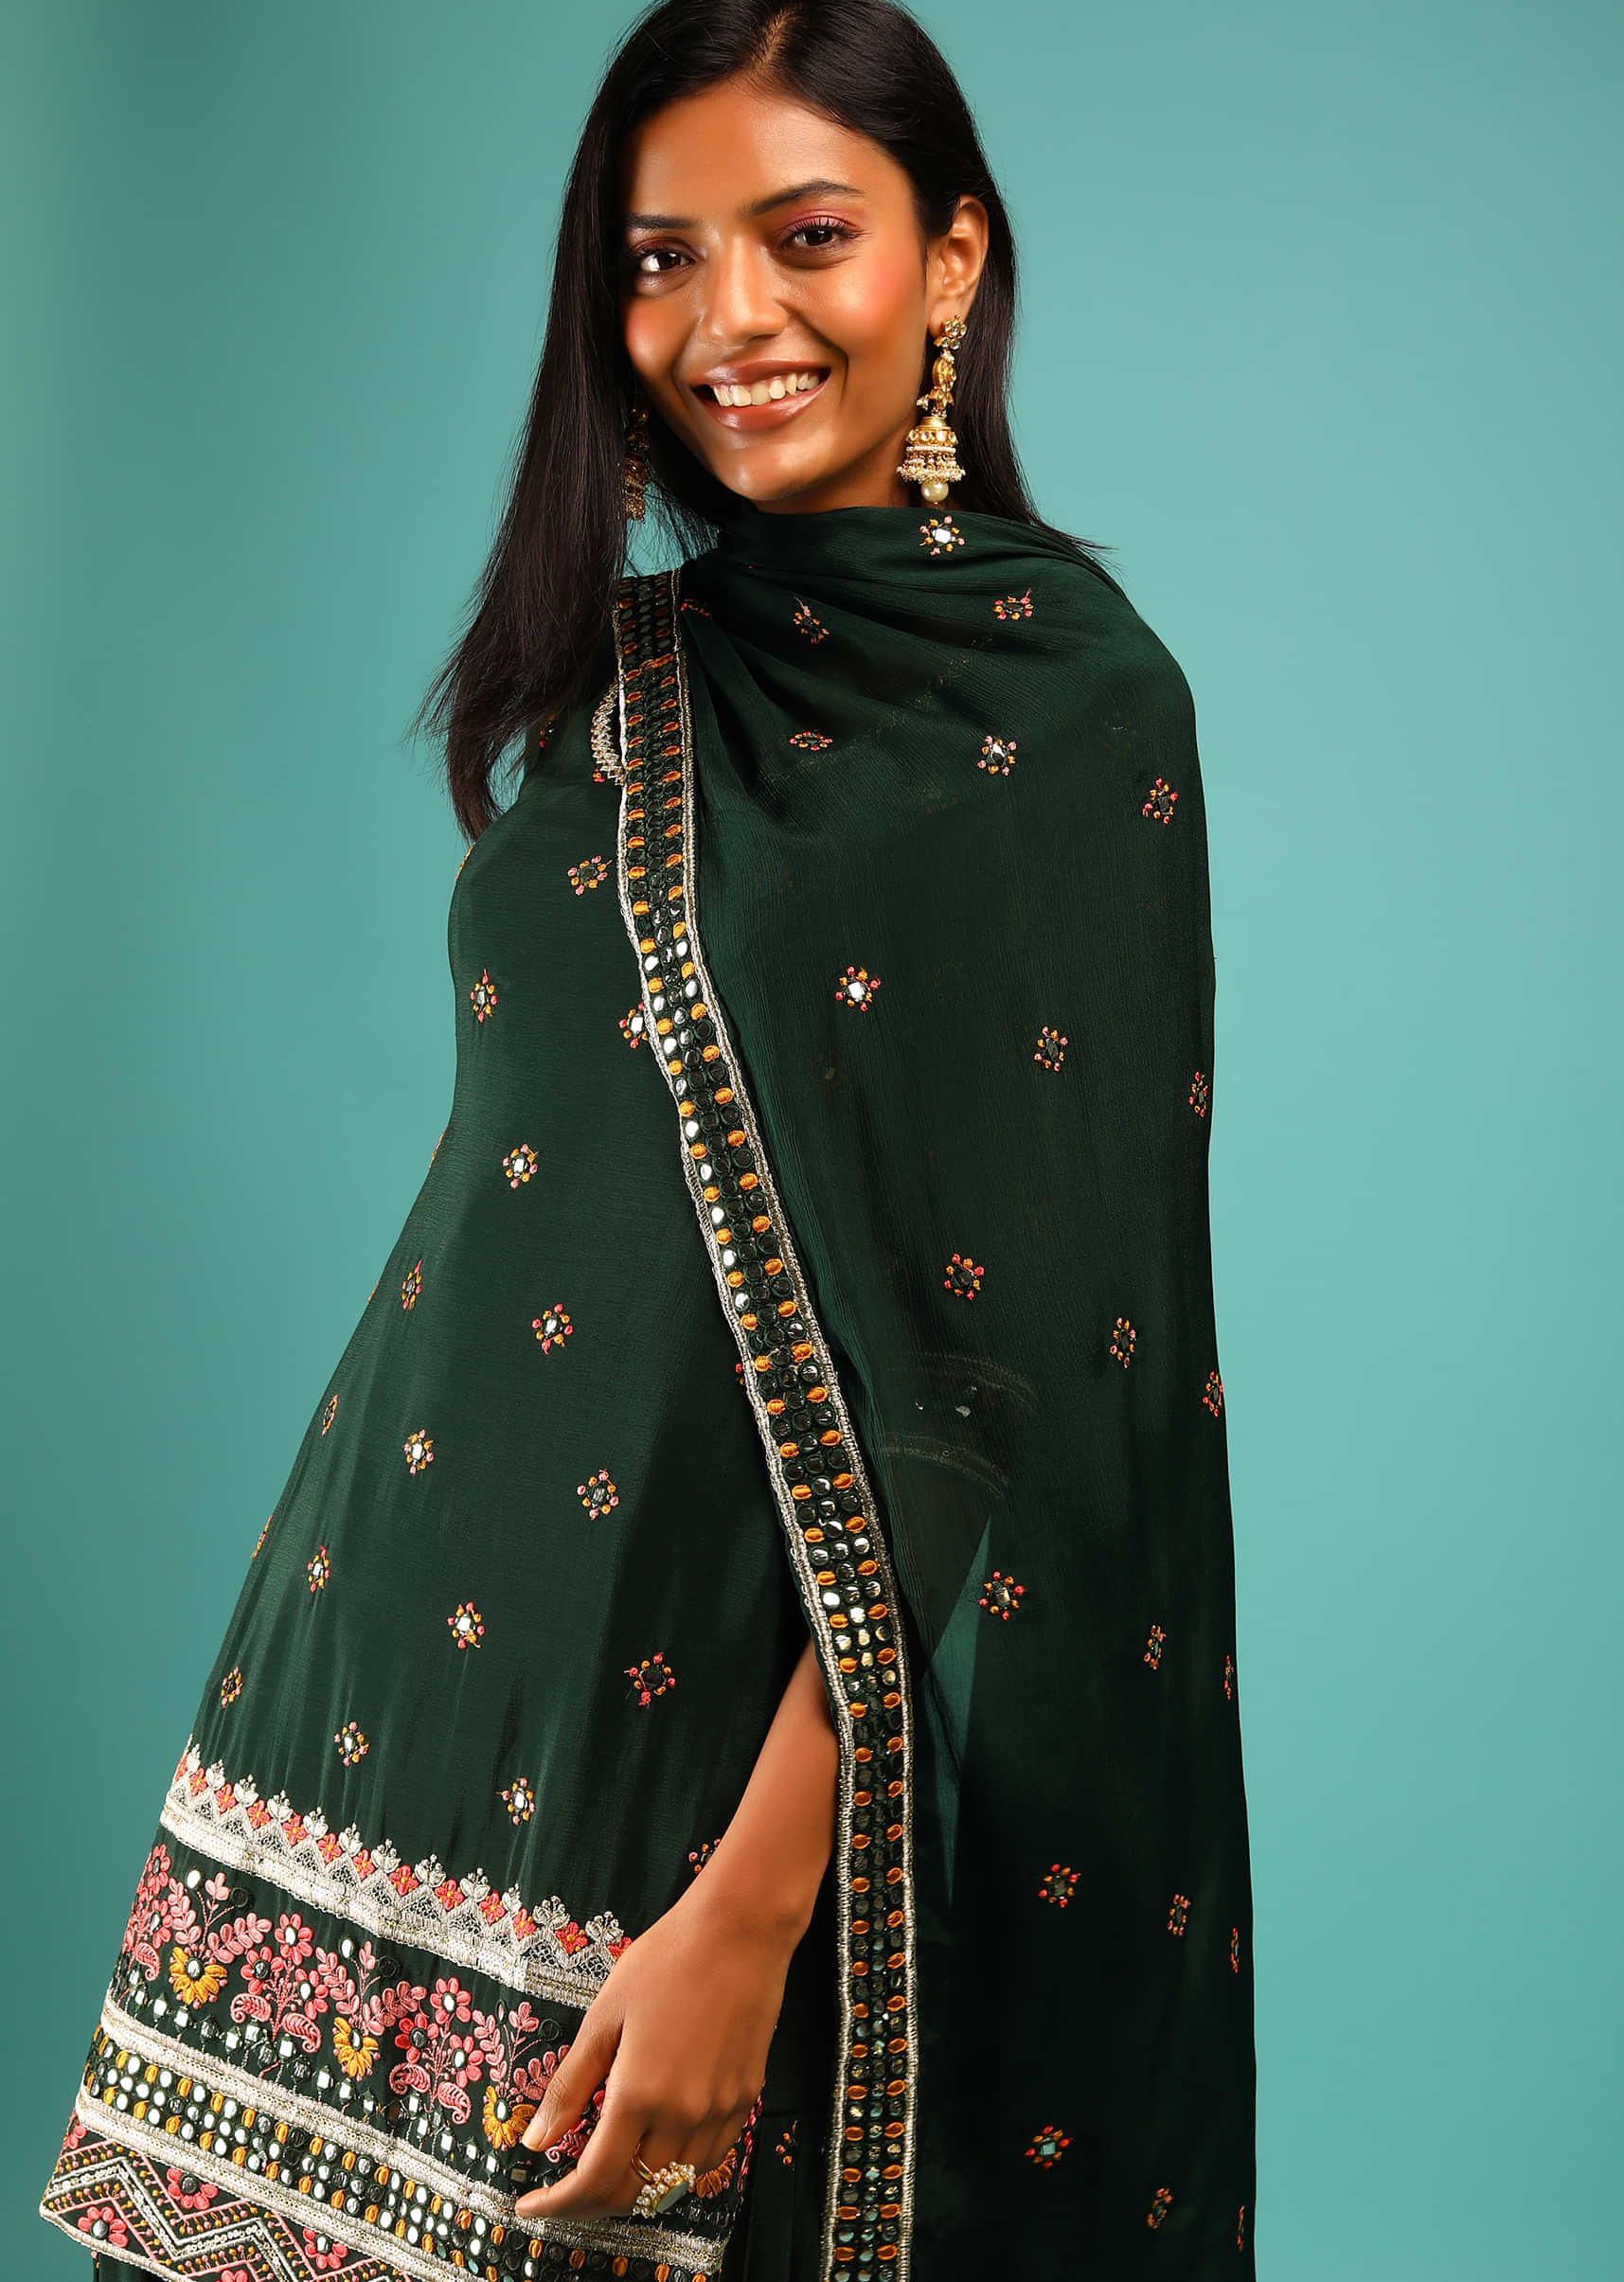 Pine Green Sharara Suit With Three Quarter Sleeves And Multi Colored Resham And Abla Embroidery